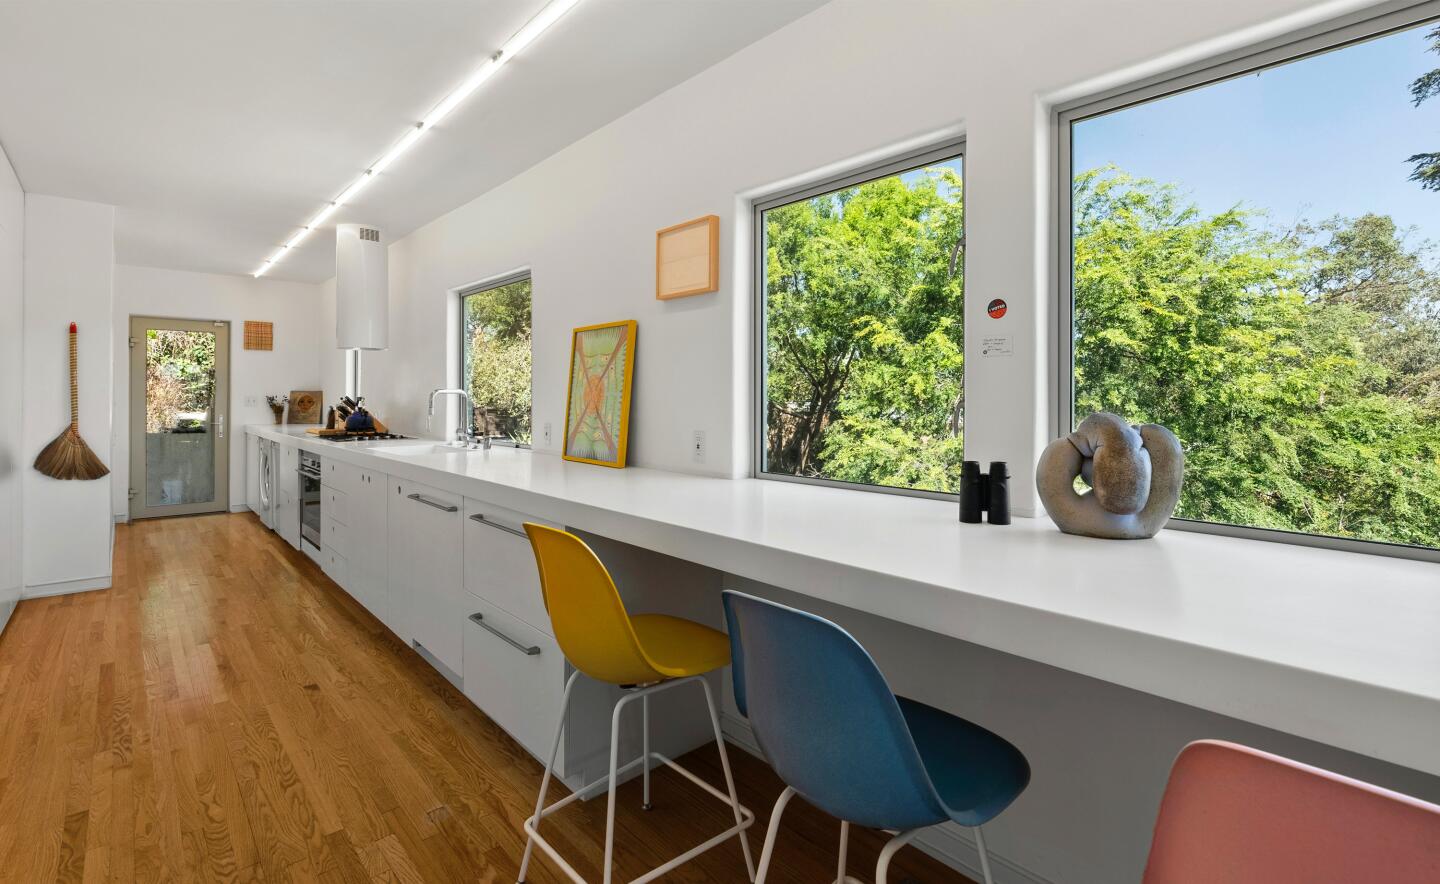 The kitchen with a long counter, chairs and windows overlooking trees.